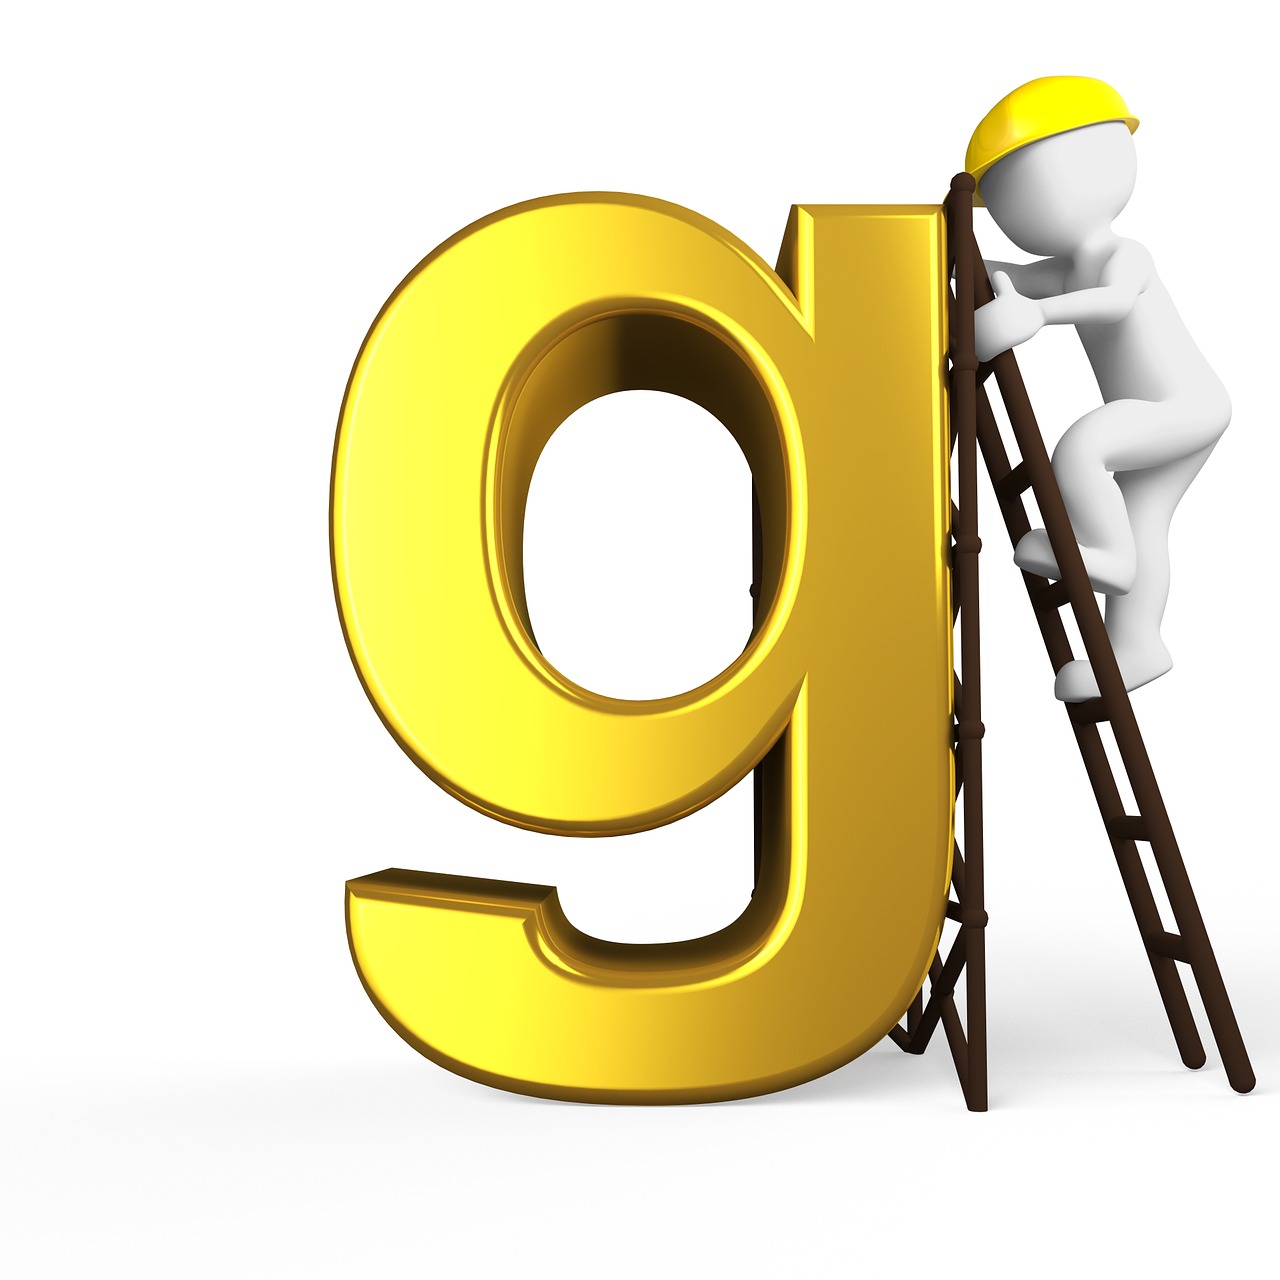 G,letter,alphabet,alphabetically,abc - free image from ...